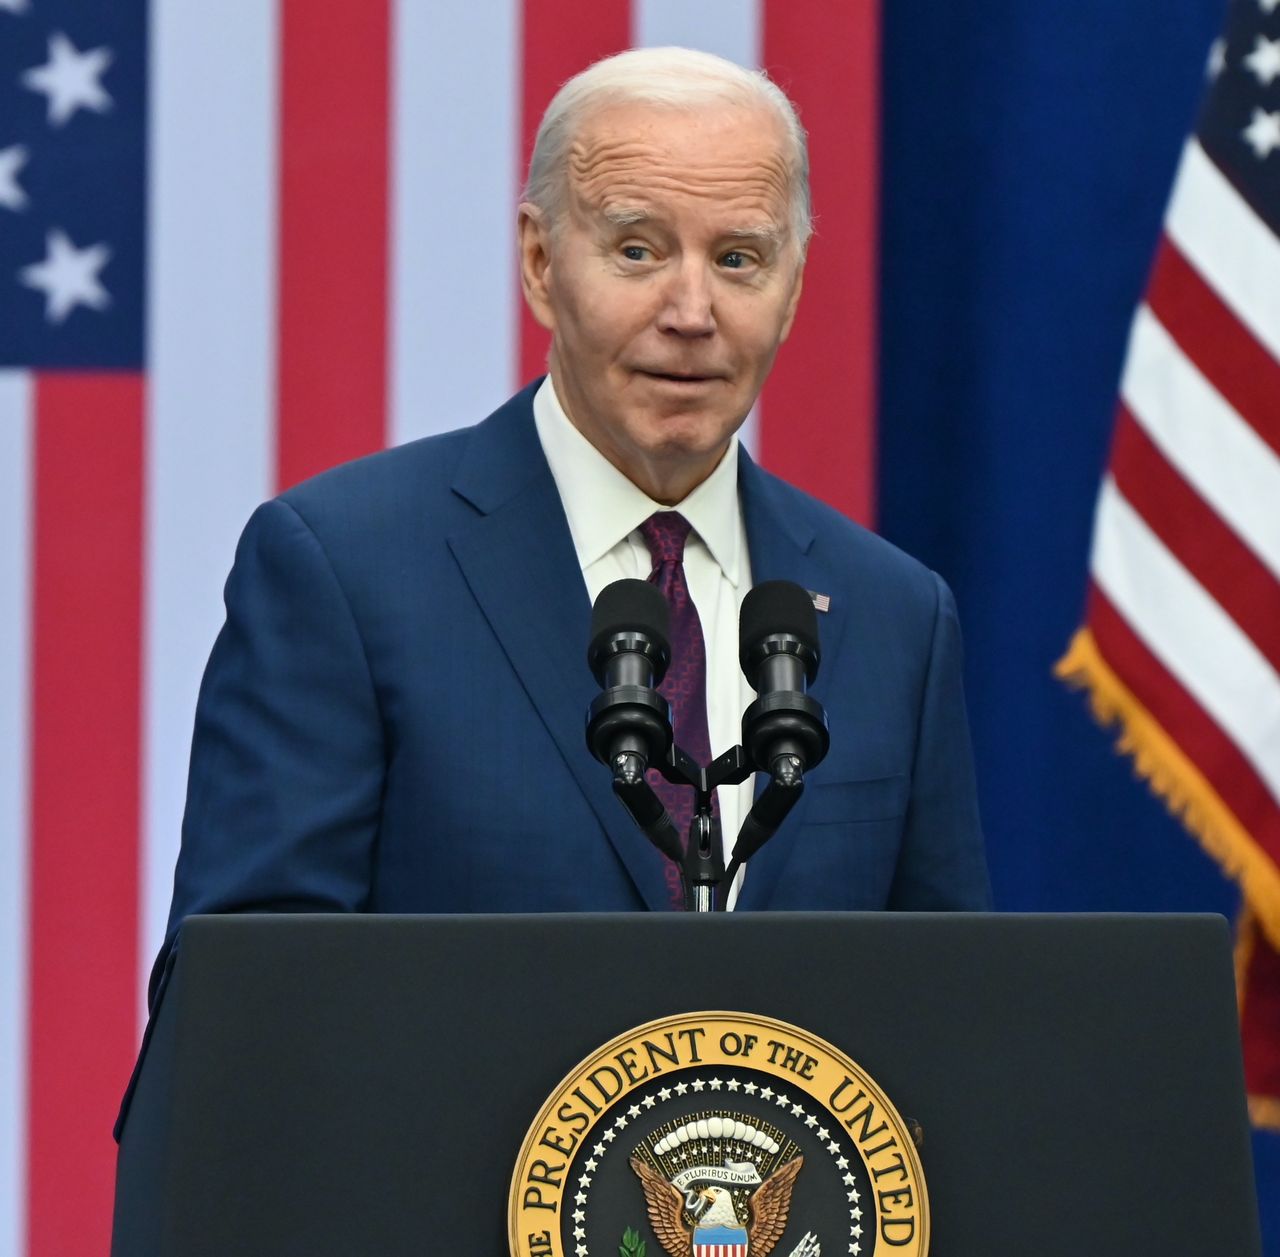 GOFFSTOWN, NEW HAMPSHIRE, UNITED STATES - MARCH 11: President of the United States Joe Biden delivers remarks on lowering costs for American families and delivers his vision in contrast to Former U.S. President Donald J. Trump at the YMCA Allard Center in Goffstown, New Hampshire, United States on March 11, 2024. (Photo by Kyle Mazza/Anadolu via Getty Images)